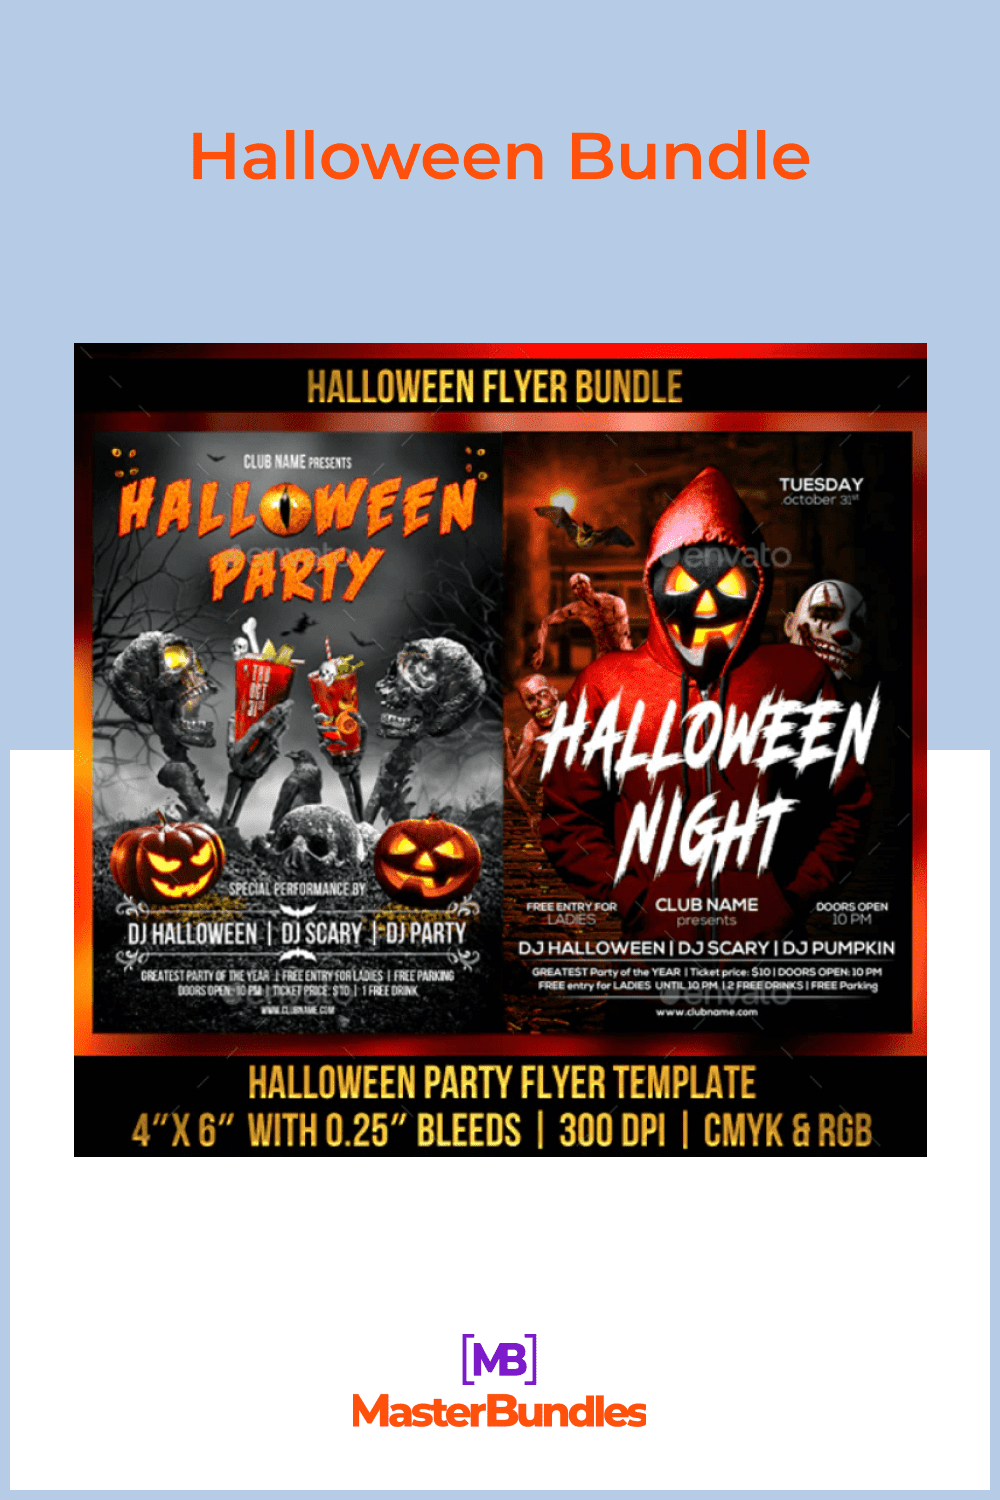 Halloween flyers with stylish designs let you stand out.